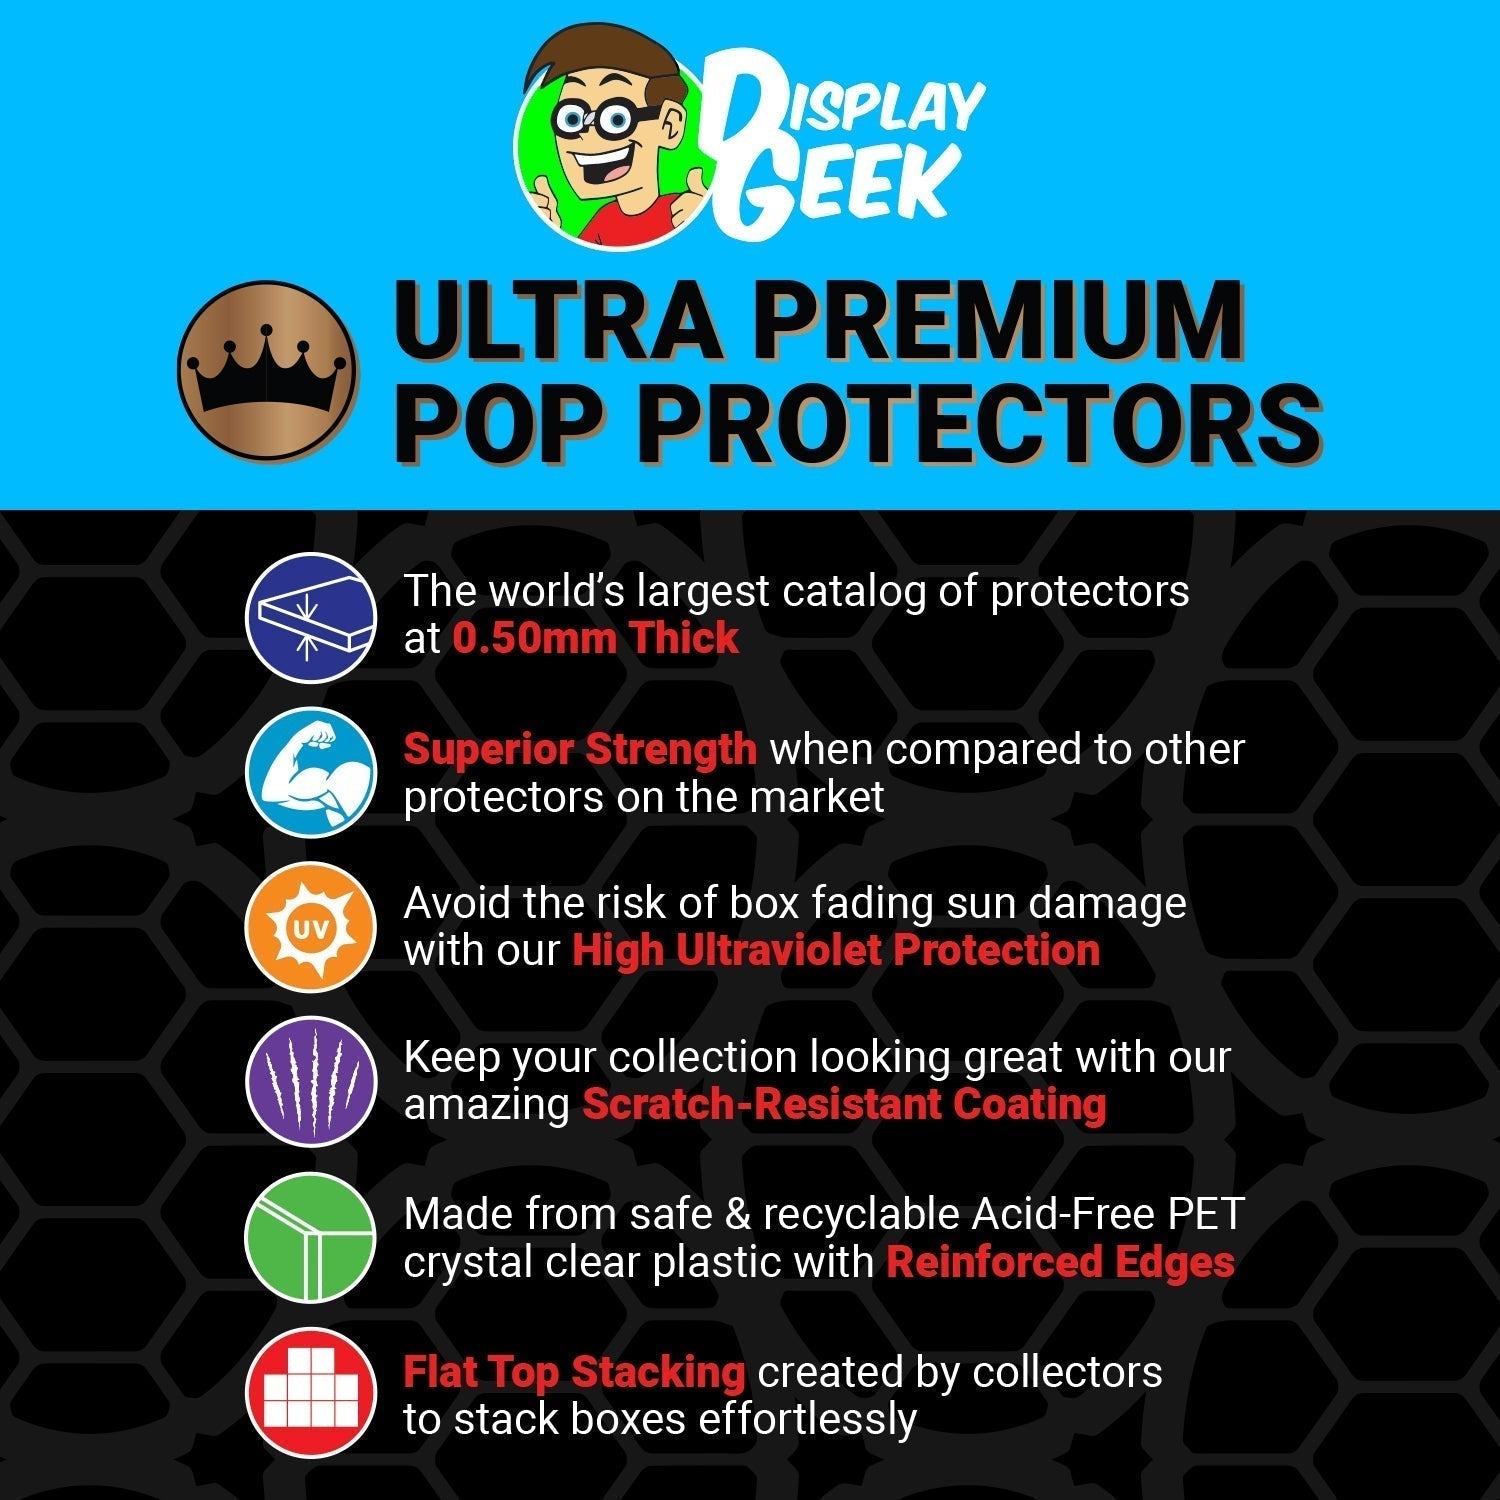 Pop Protector for 2 Pack Brok & Sindri Funko Pop - PPG Pop Protector Guide Search Created by Display Geek